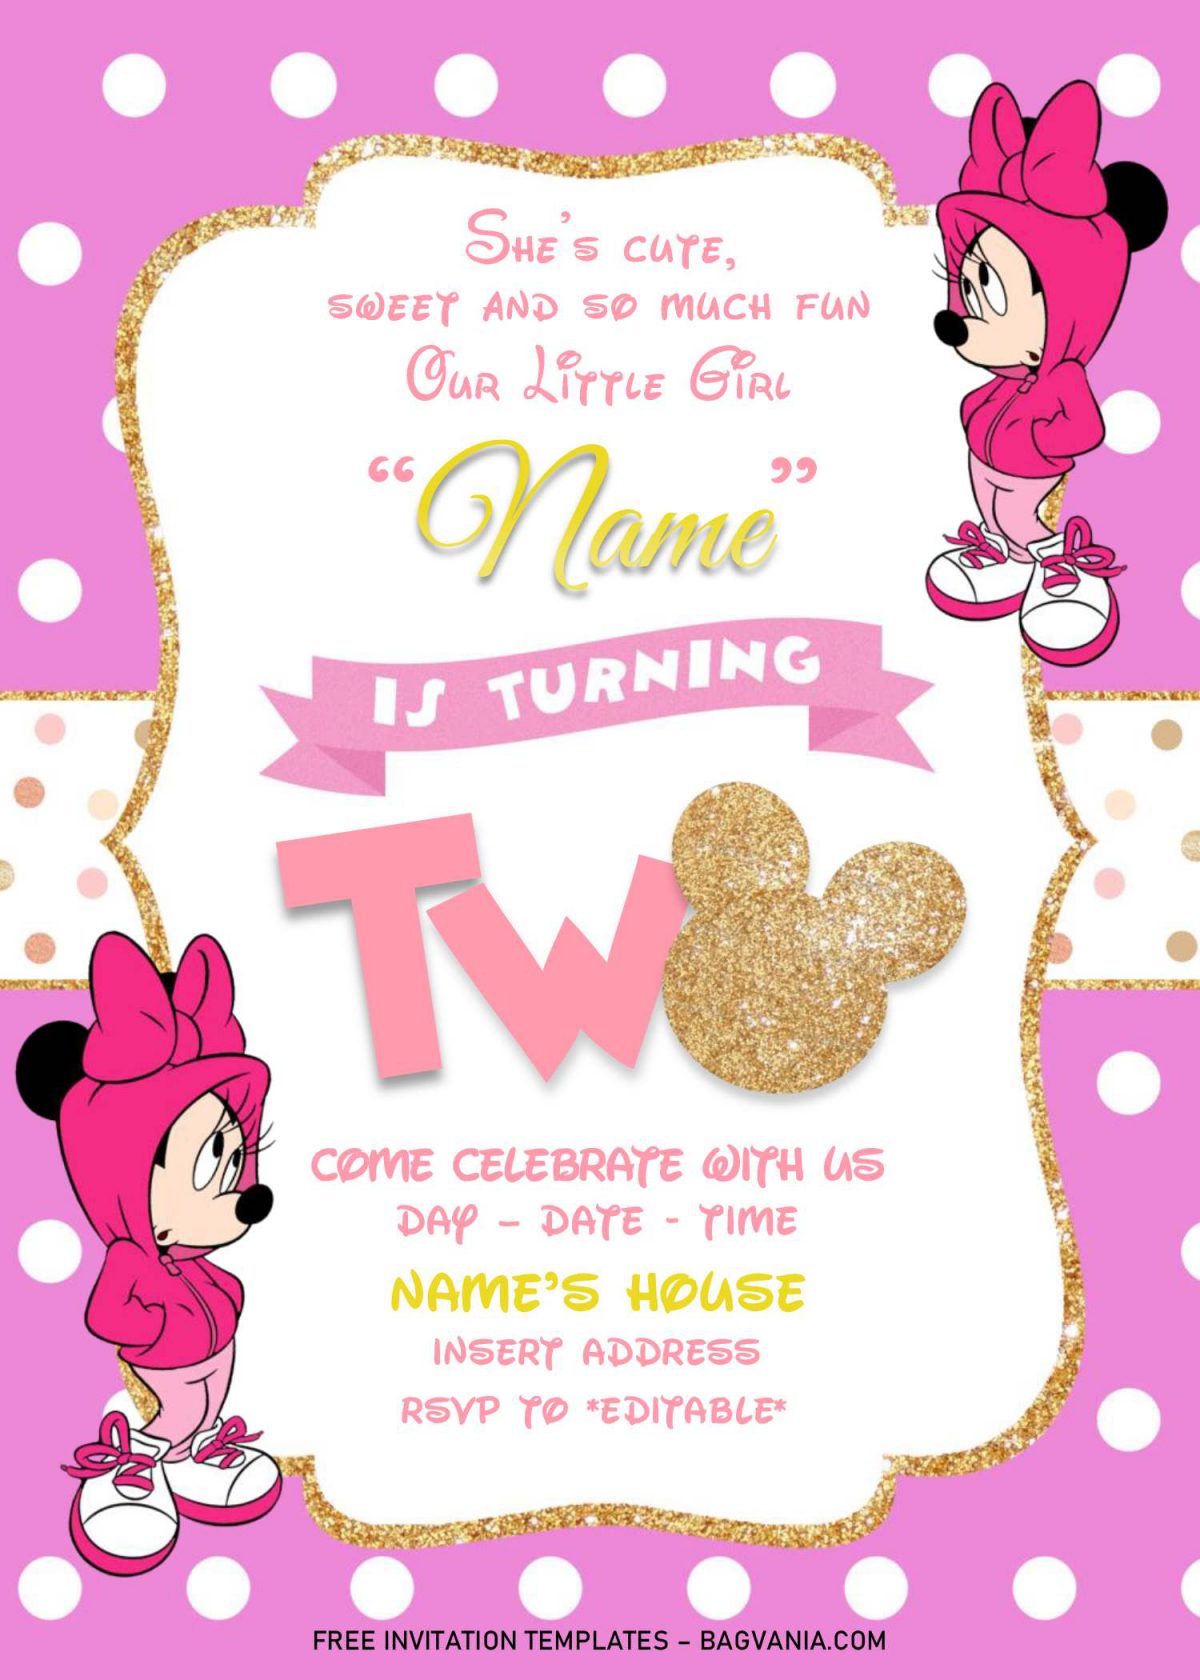 Gold Glitter Minnie Mouse Invitation Templates - Editable .Docx and has minnie wearing hoodie